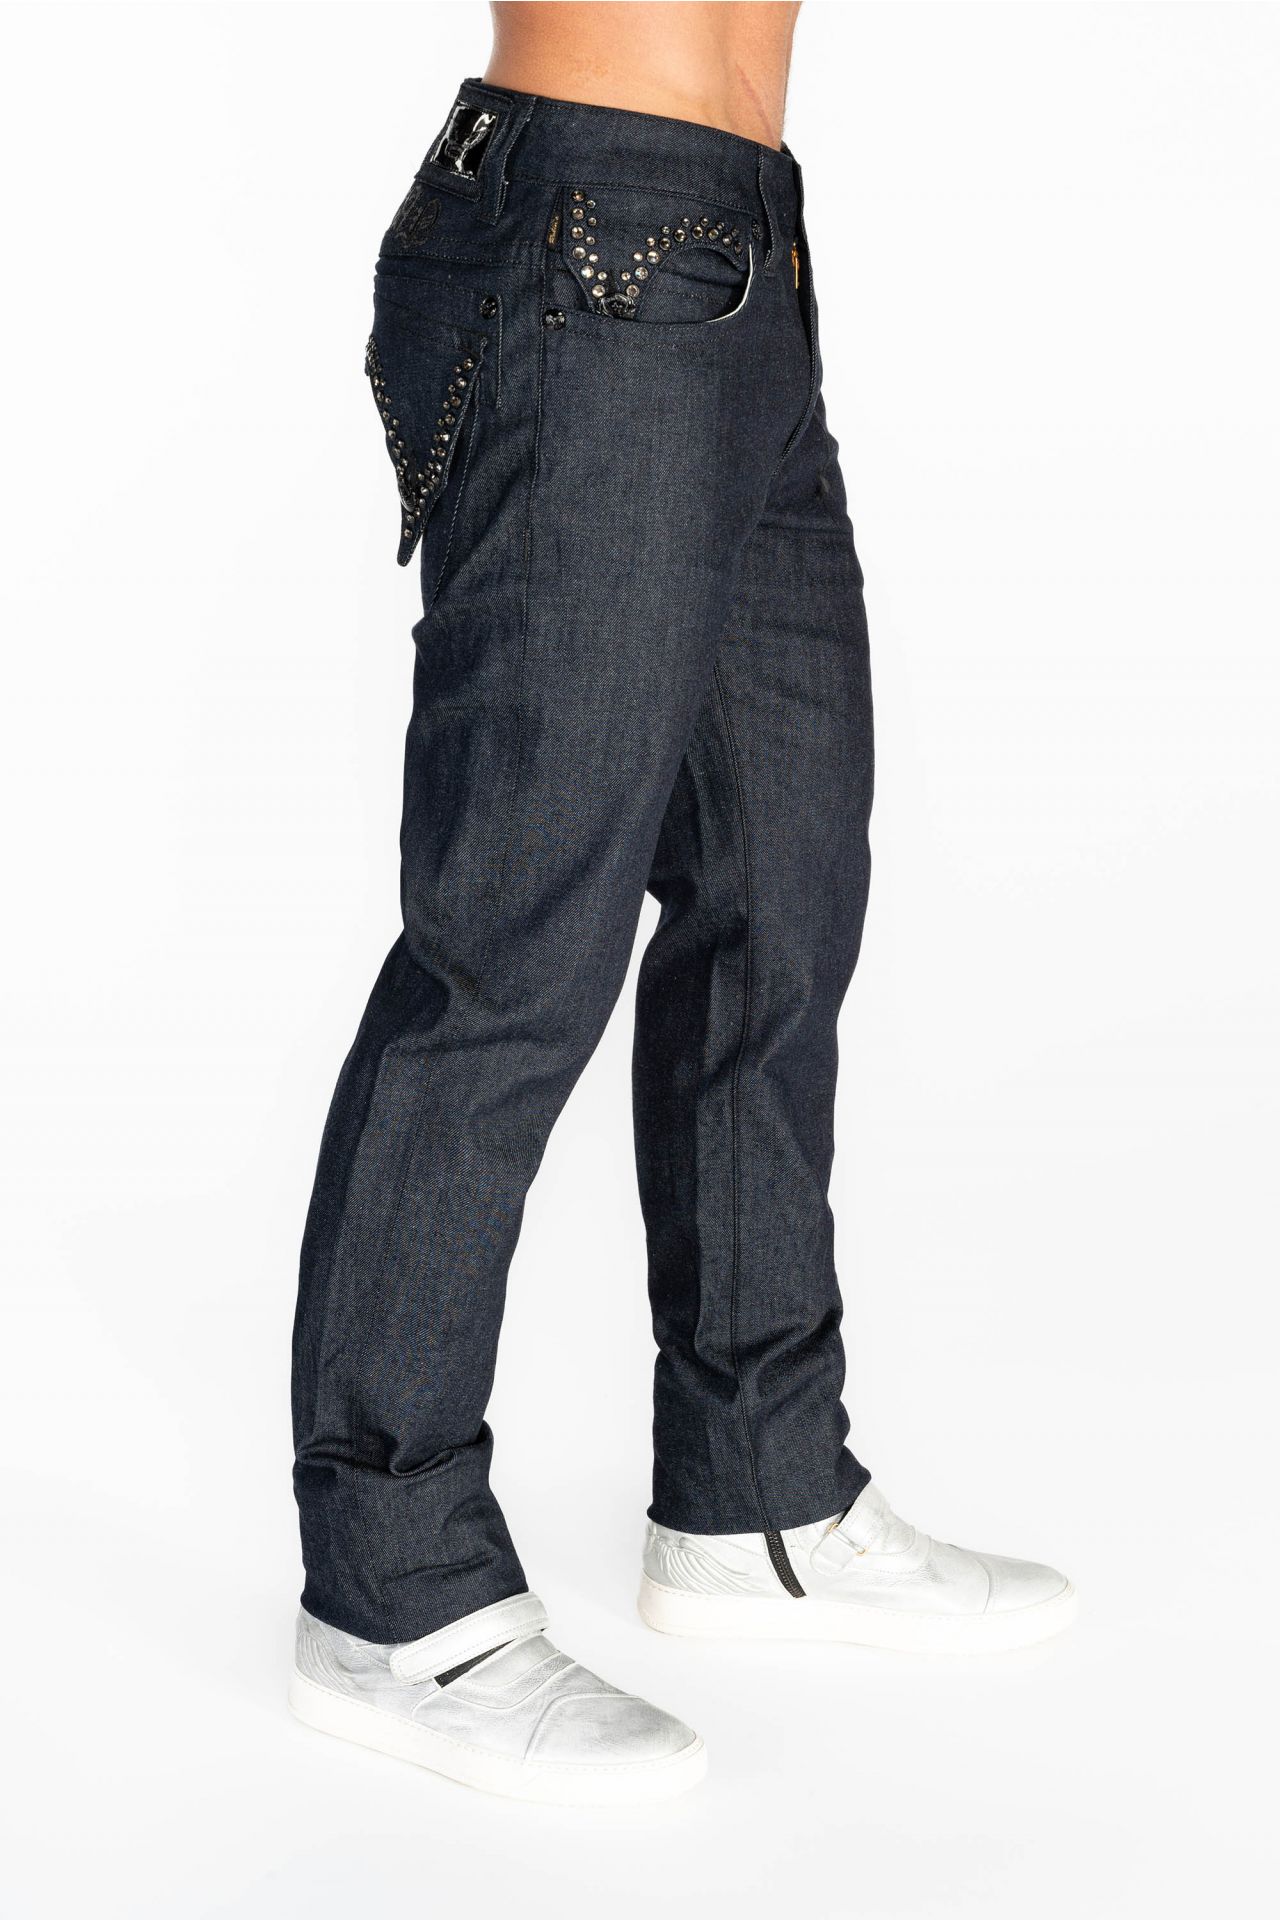 MENS RAW DENIM SLIM FIT KILLER FLAP JEANS WITH O.E. BLACK SCRIPT EMBROIDERY AND CRYSTALS